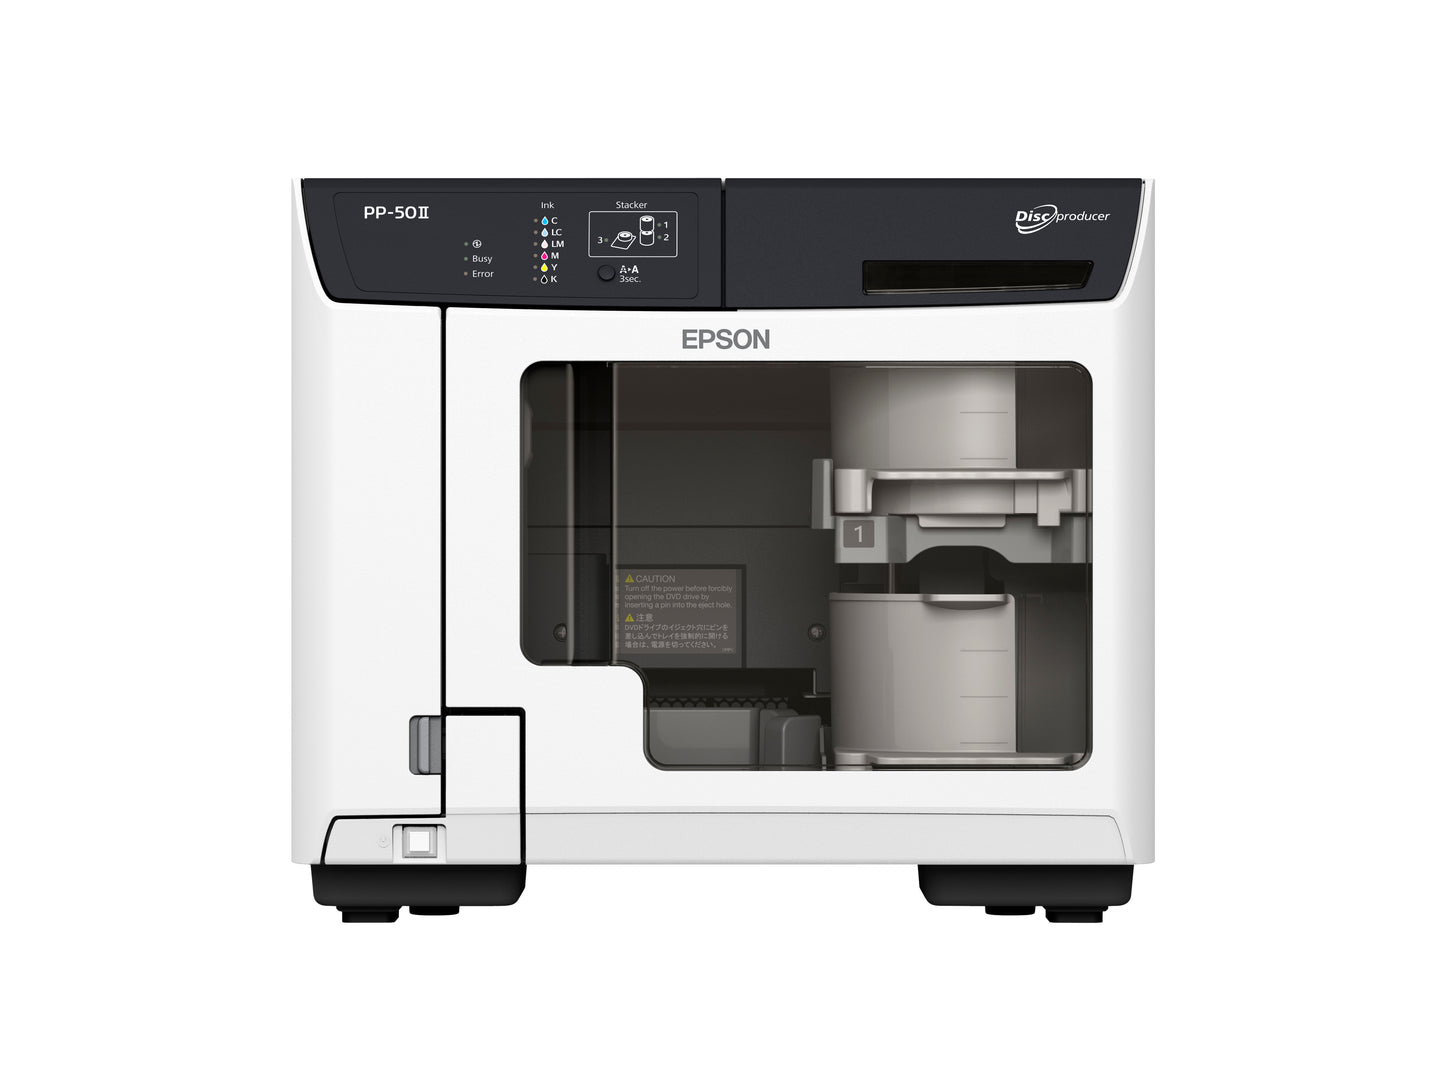 Epson Discproducer PP 50 II